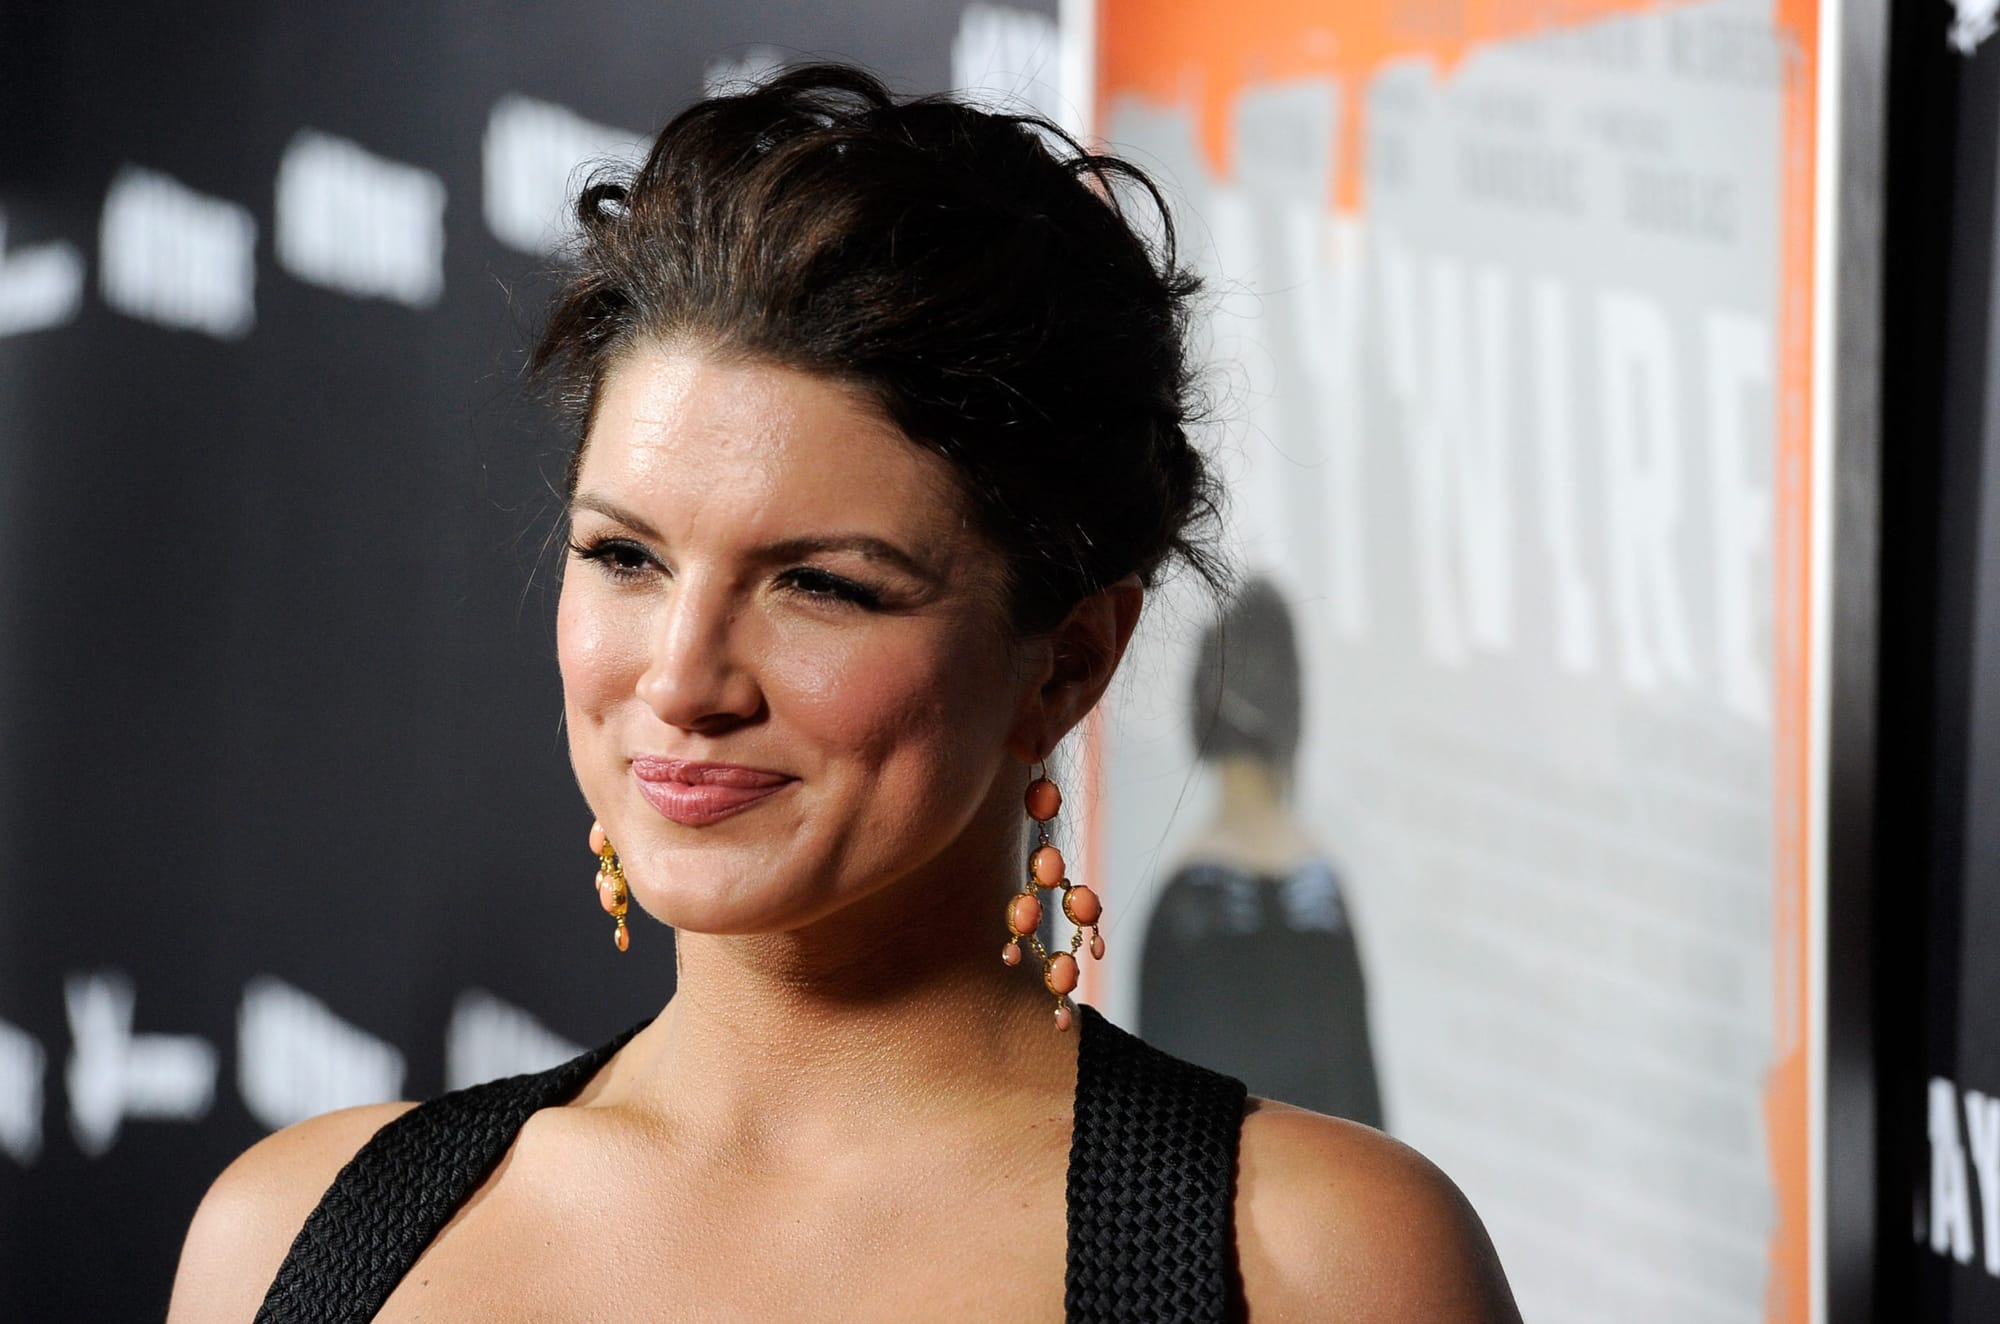 Gina Carano Strikes Back: Files Lawsuit Against Disney and Lucasfilm, Backed by Elon Musk